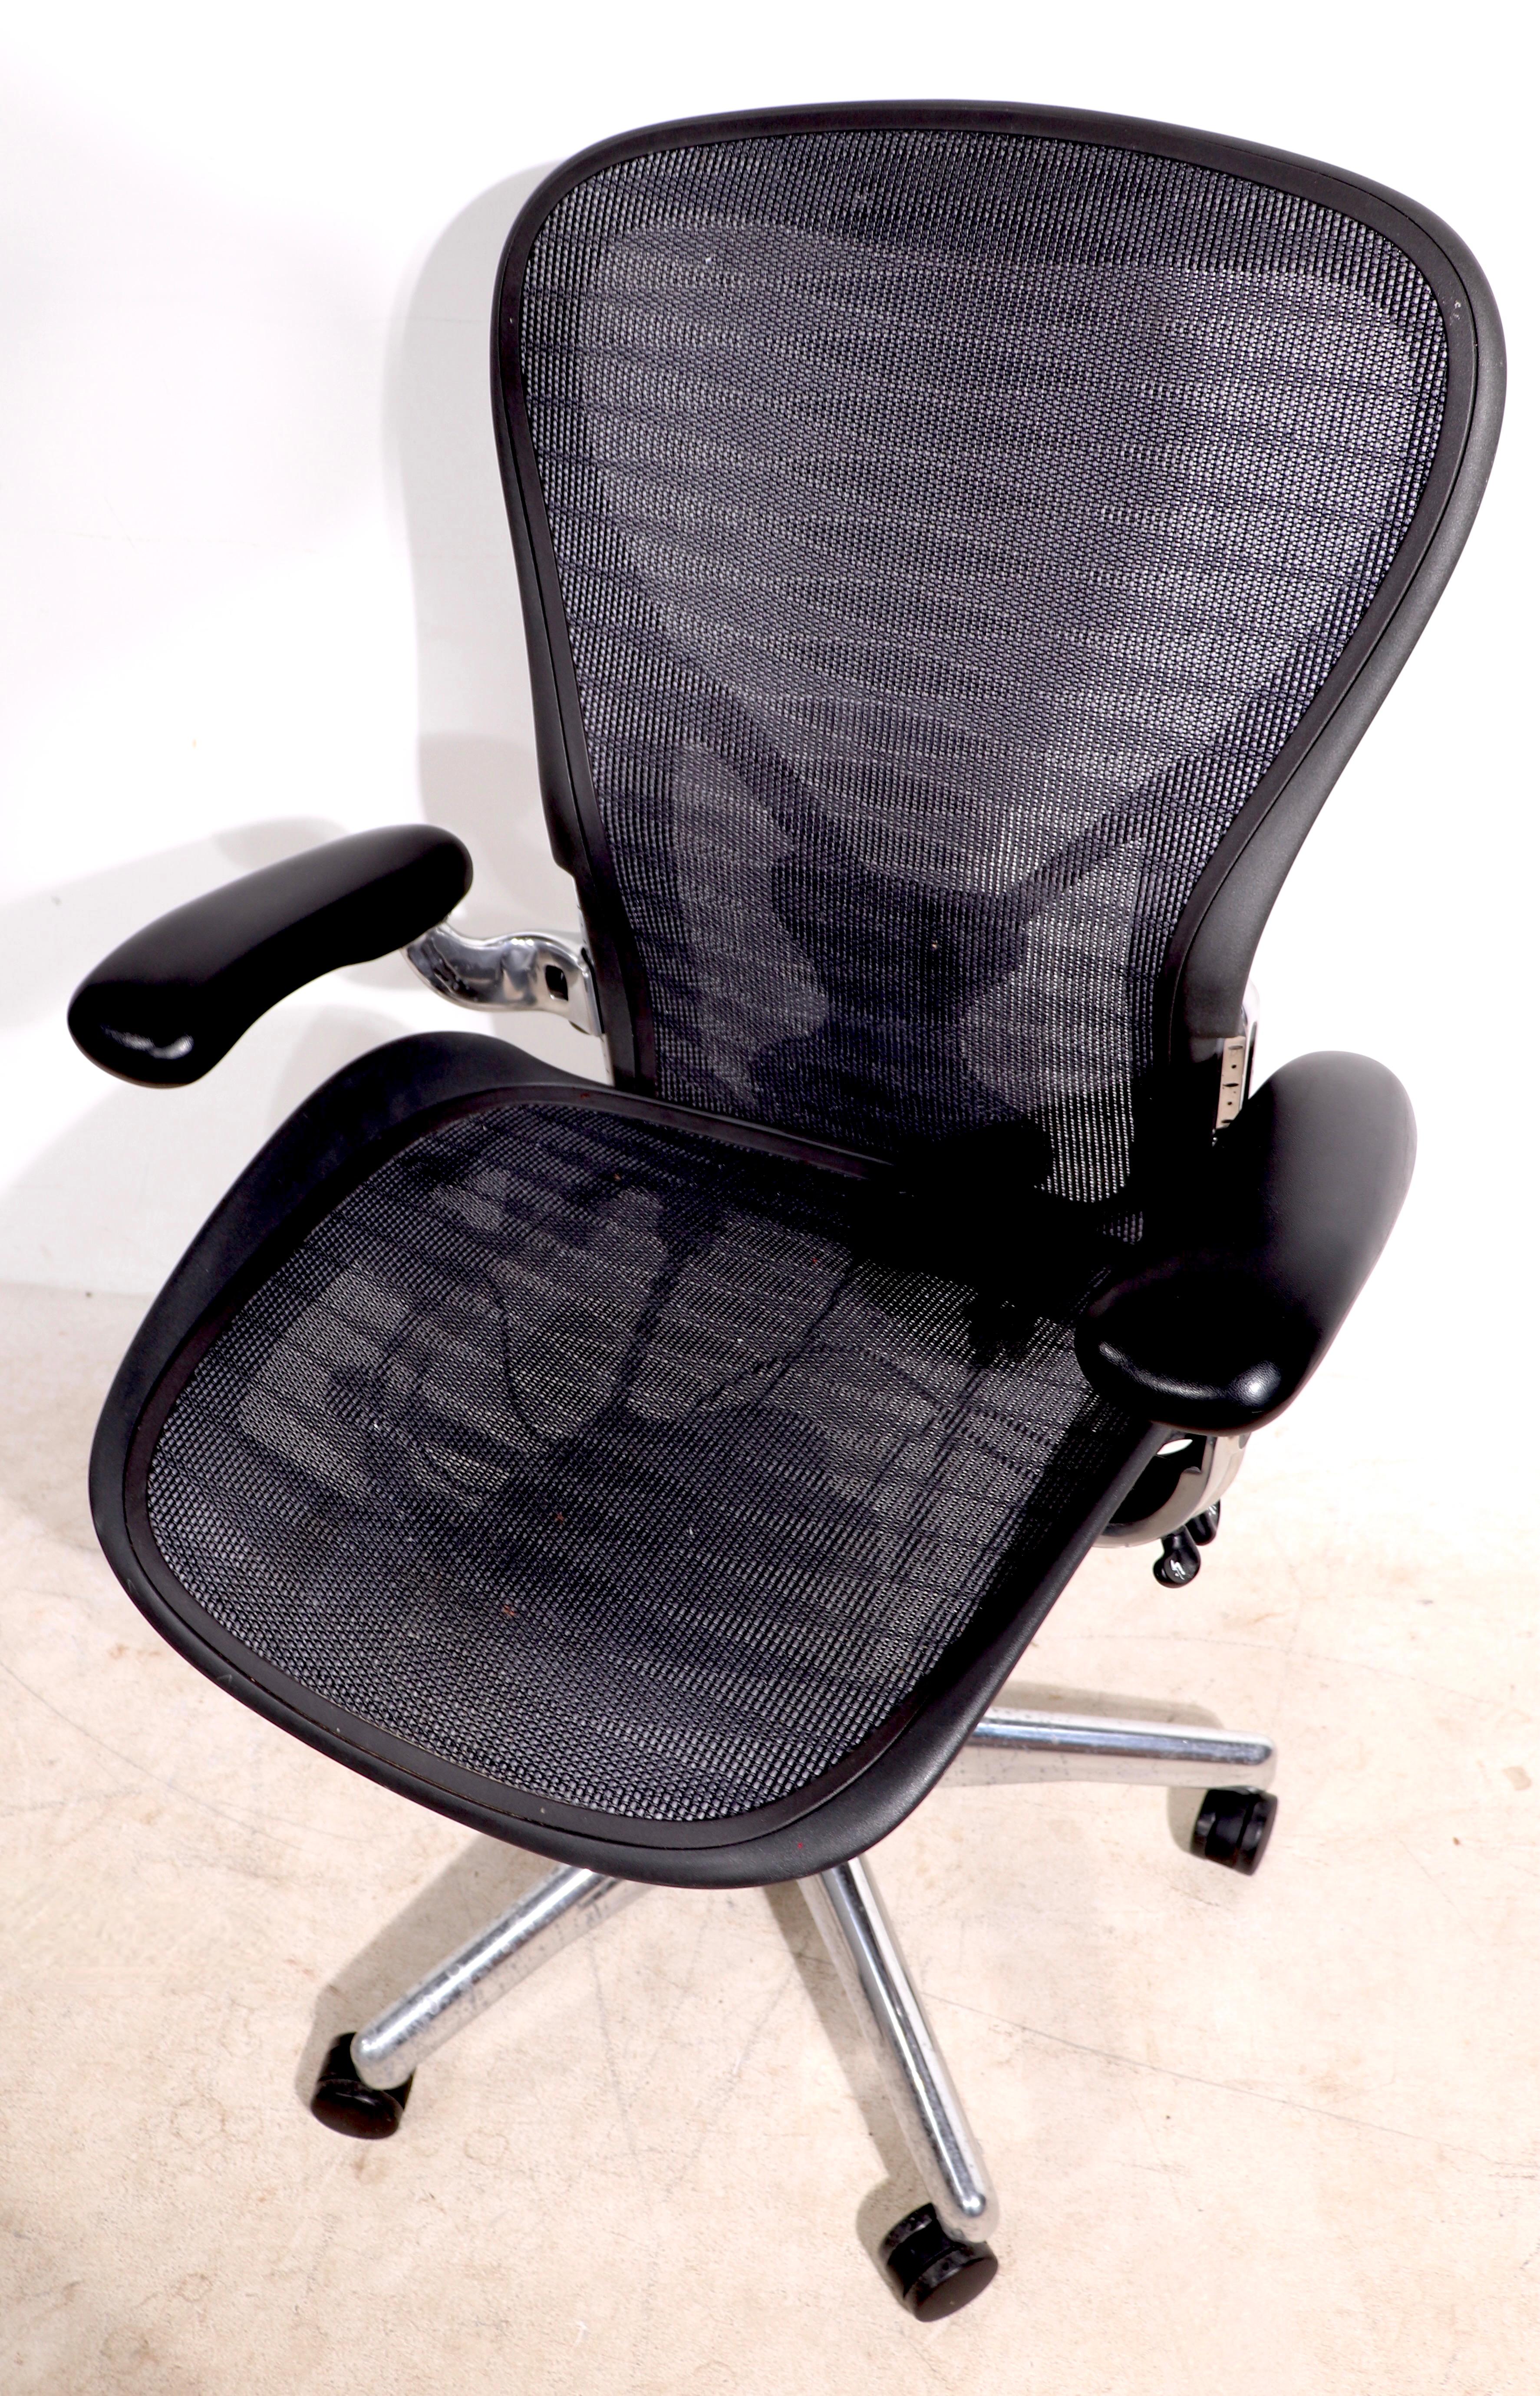 Generally the word iconic is overused and hyperbolic, but not when referring to this chair. Both classic style, and comfortable ergonomic design are evident in this Herman Miller made, Aeron swivel desk chair. 
 Fully functional, clean and ready to